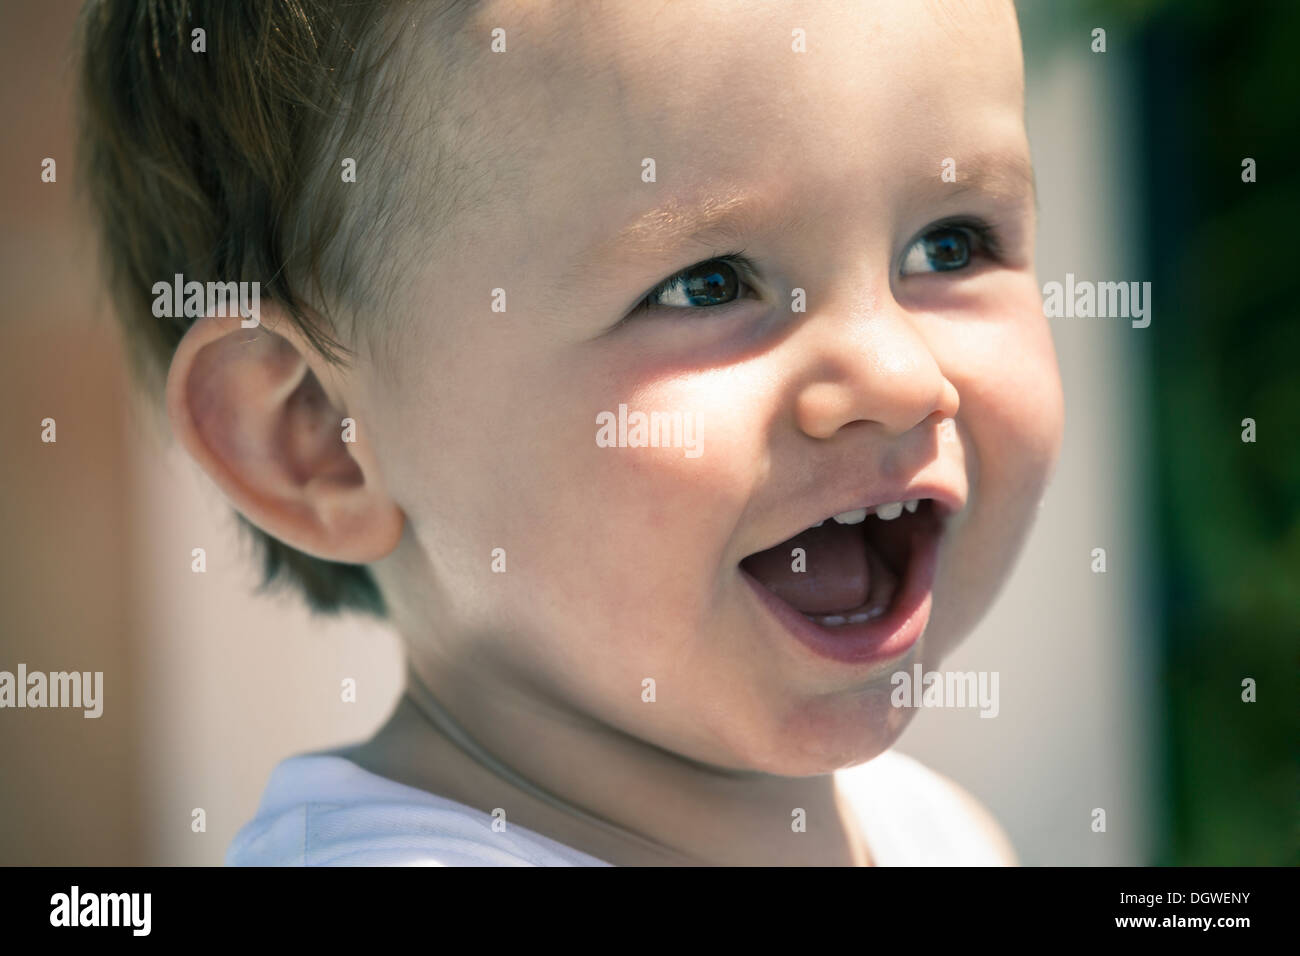 Closeup of happy baby boy face laughing. Stock Photo